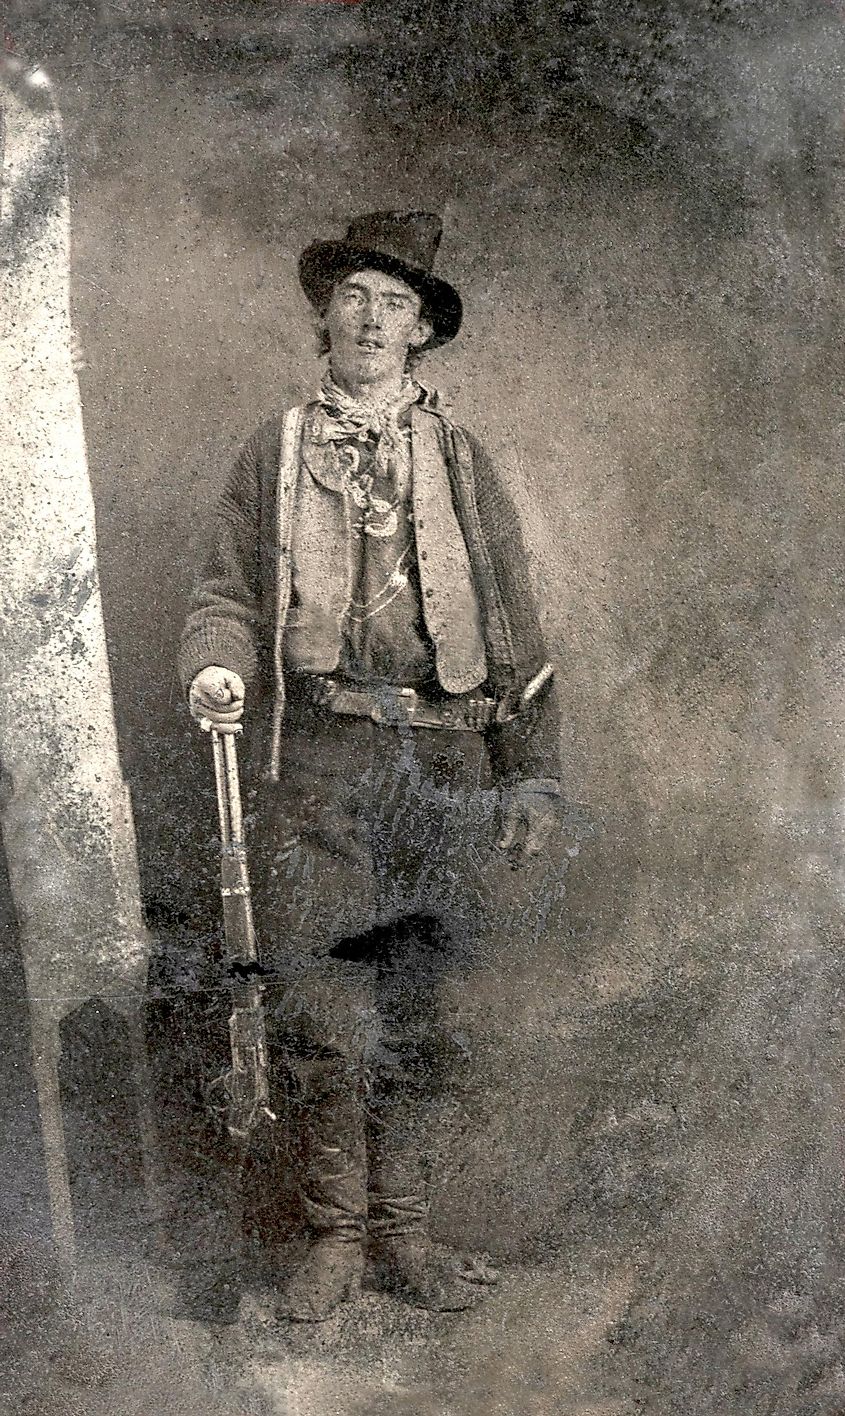 Billy the Kid. In Wikipedia. https://en.wikipedia.org/wiki/Billy_the_Kid By Ben Wittick - Brian Lebel&#039;s Old West Show and AuctionFile:Billy the Kid tintype, Fort Sumner, 1879-80.jpg, Public Domain, https://commons.wikimedia.org/w/index.php?curid=15657780